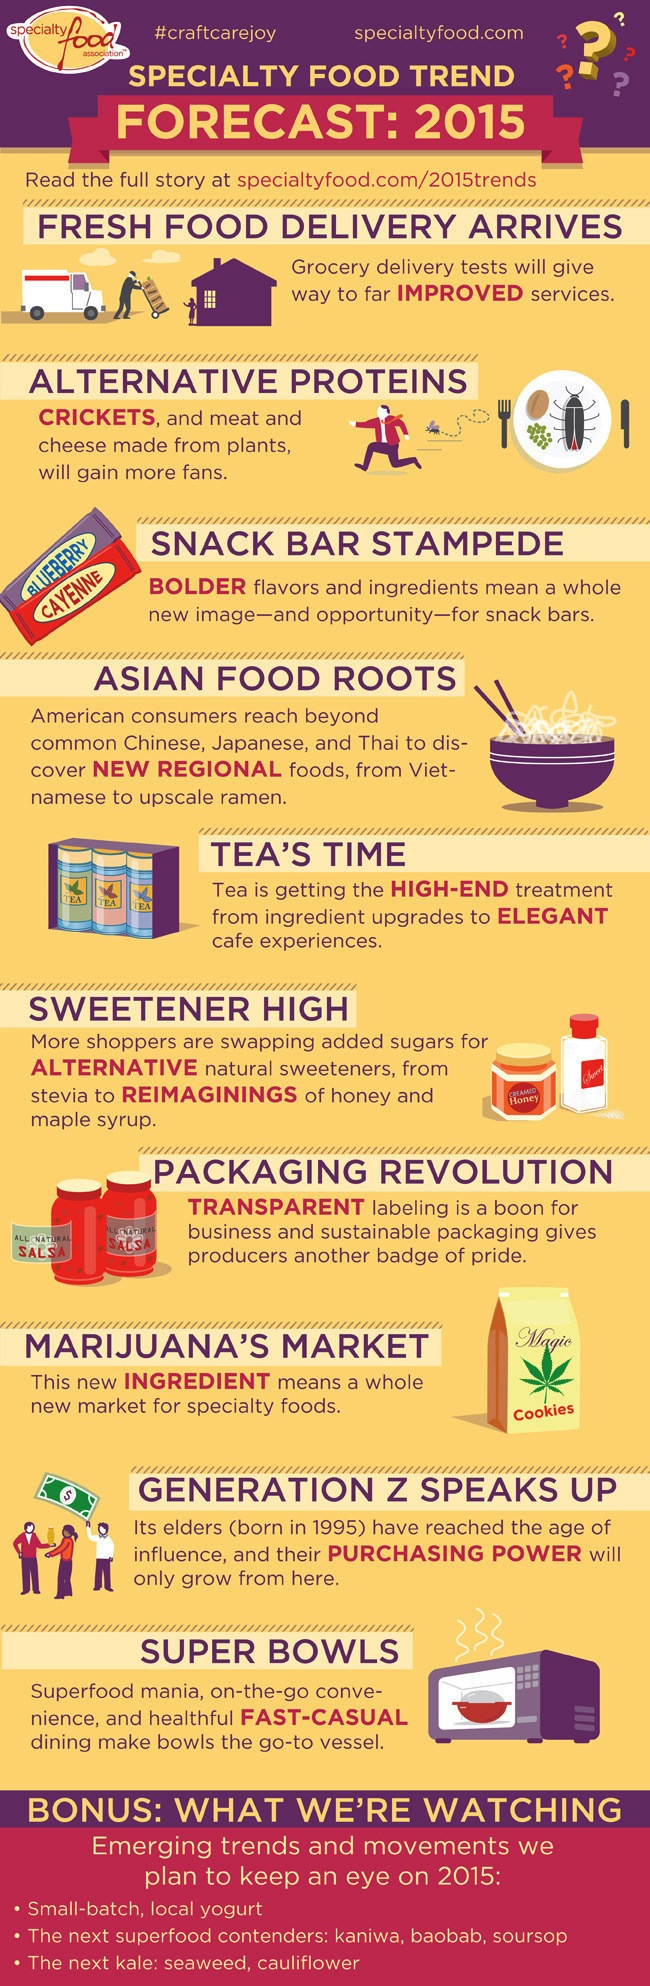 Specialty Food Association Food Trends Infographic